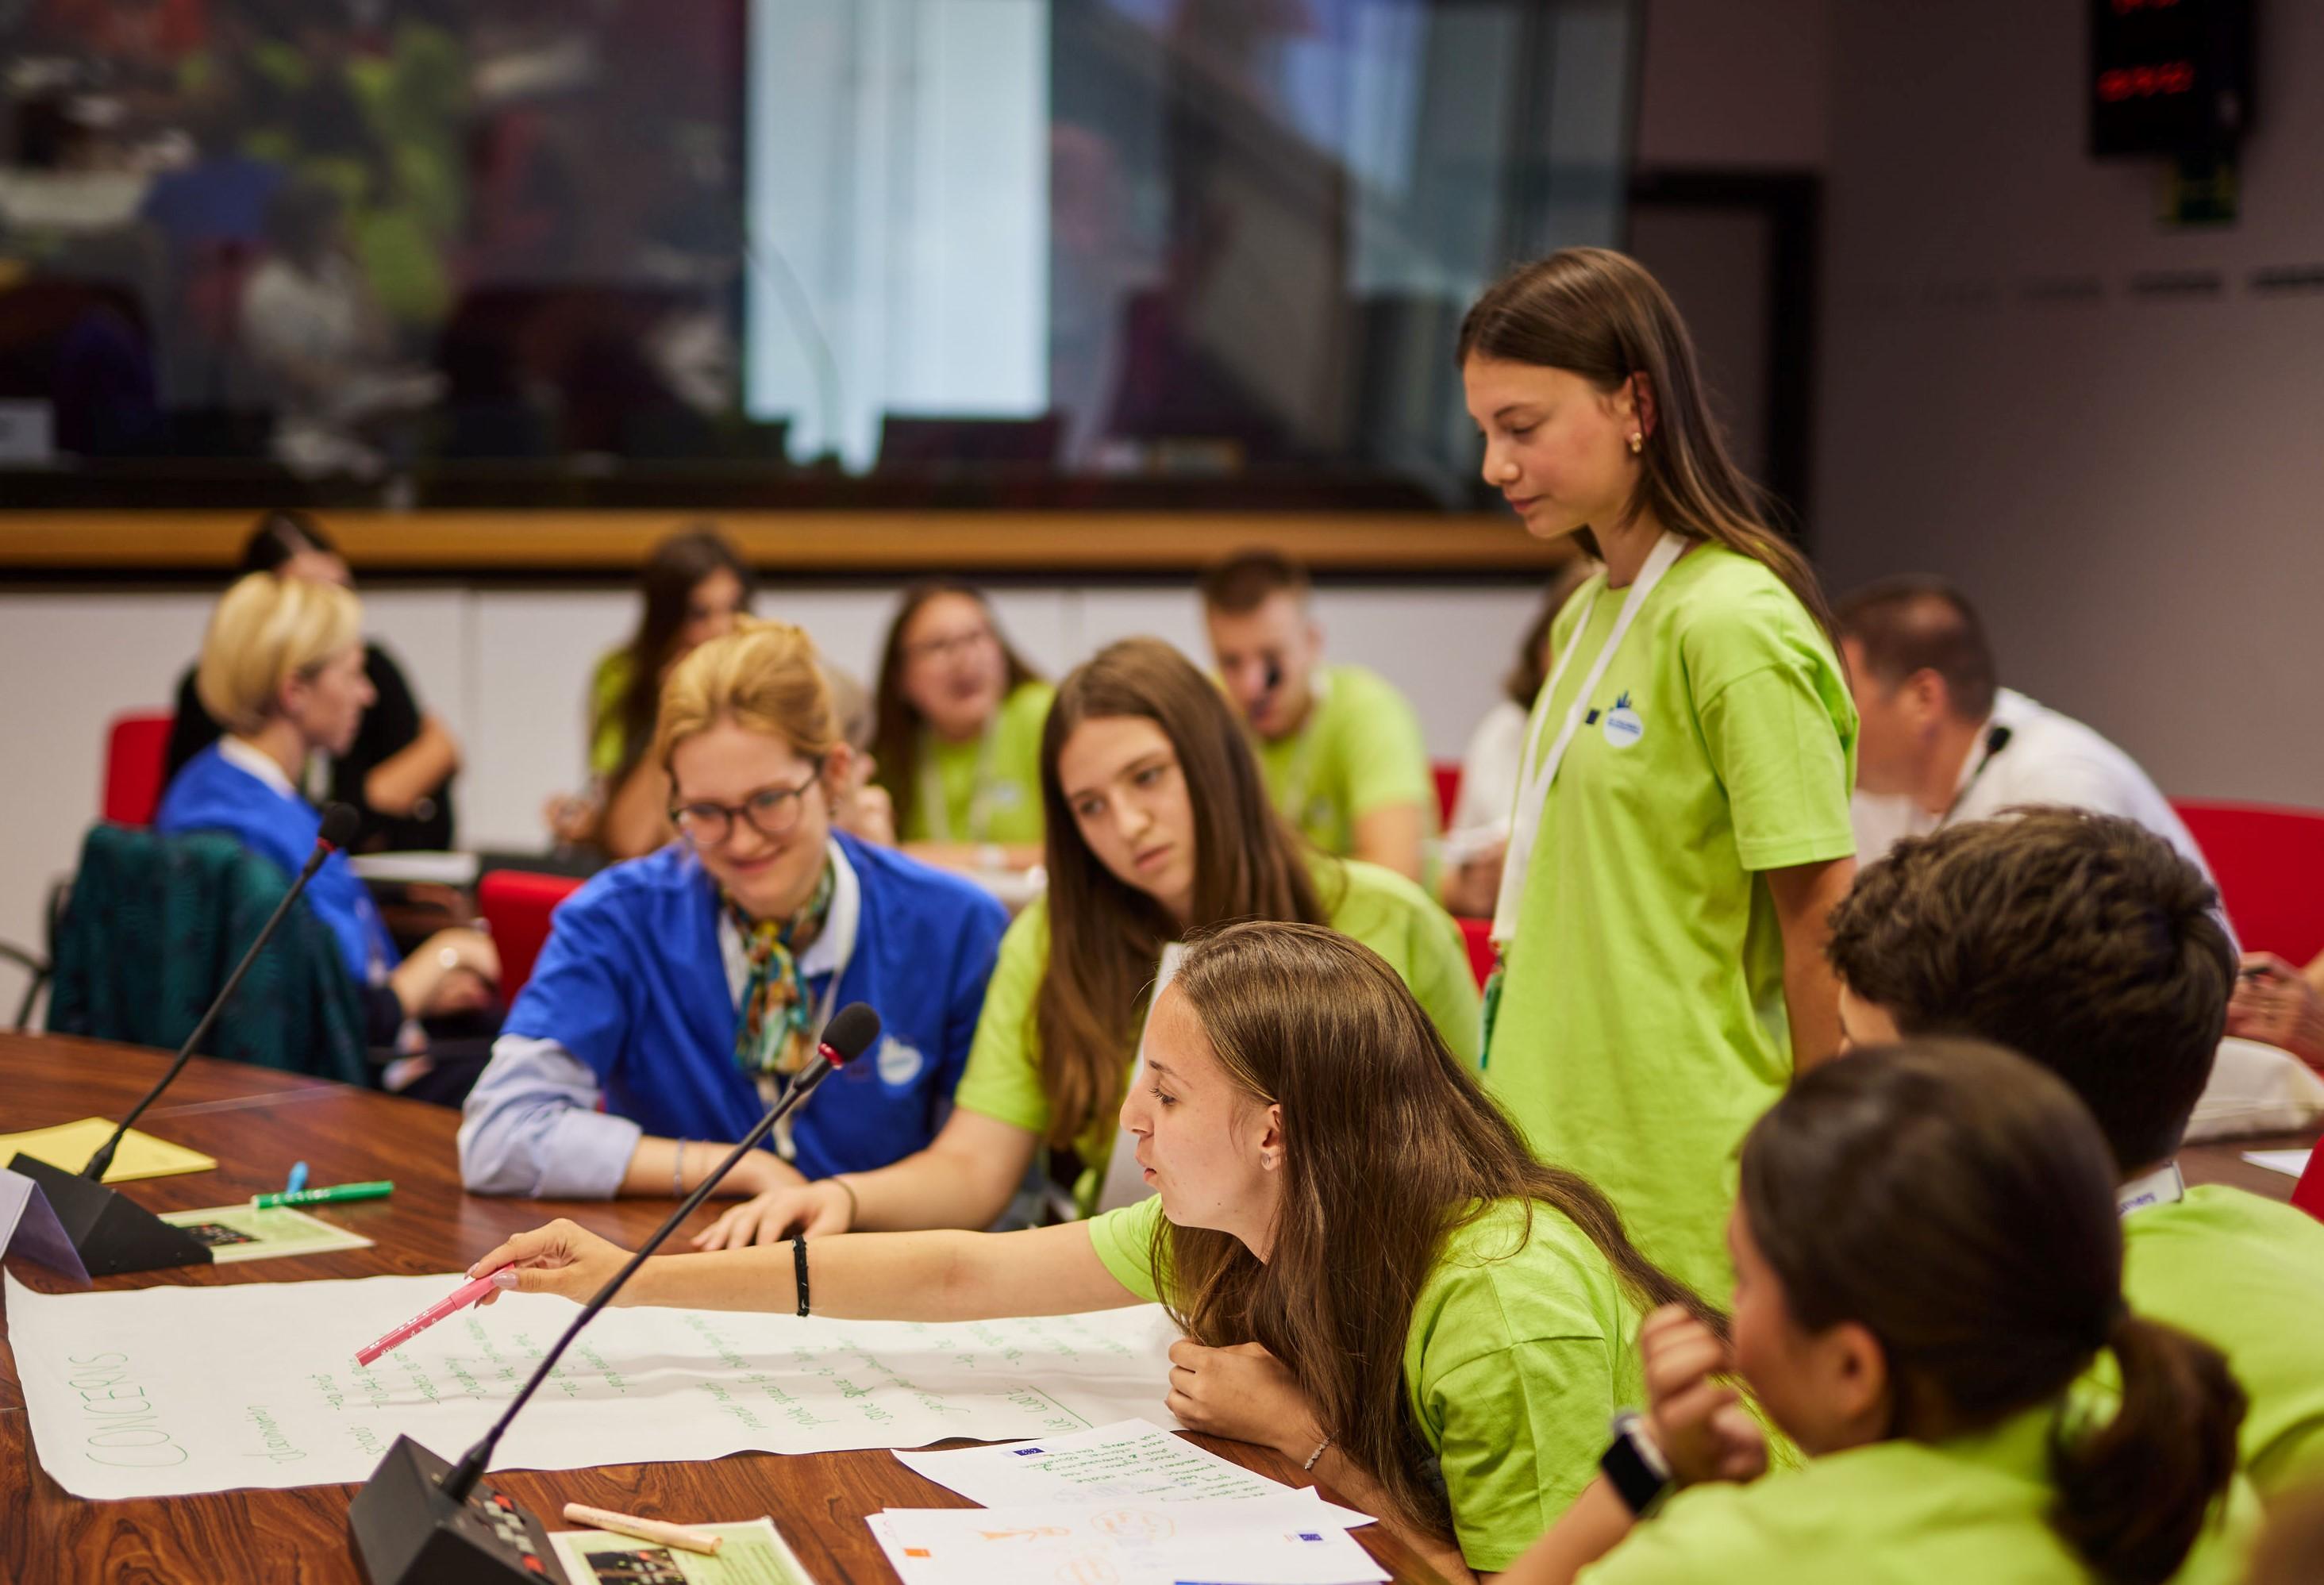 A group of children an adults are in discussion during the General Assembly meeting